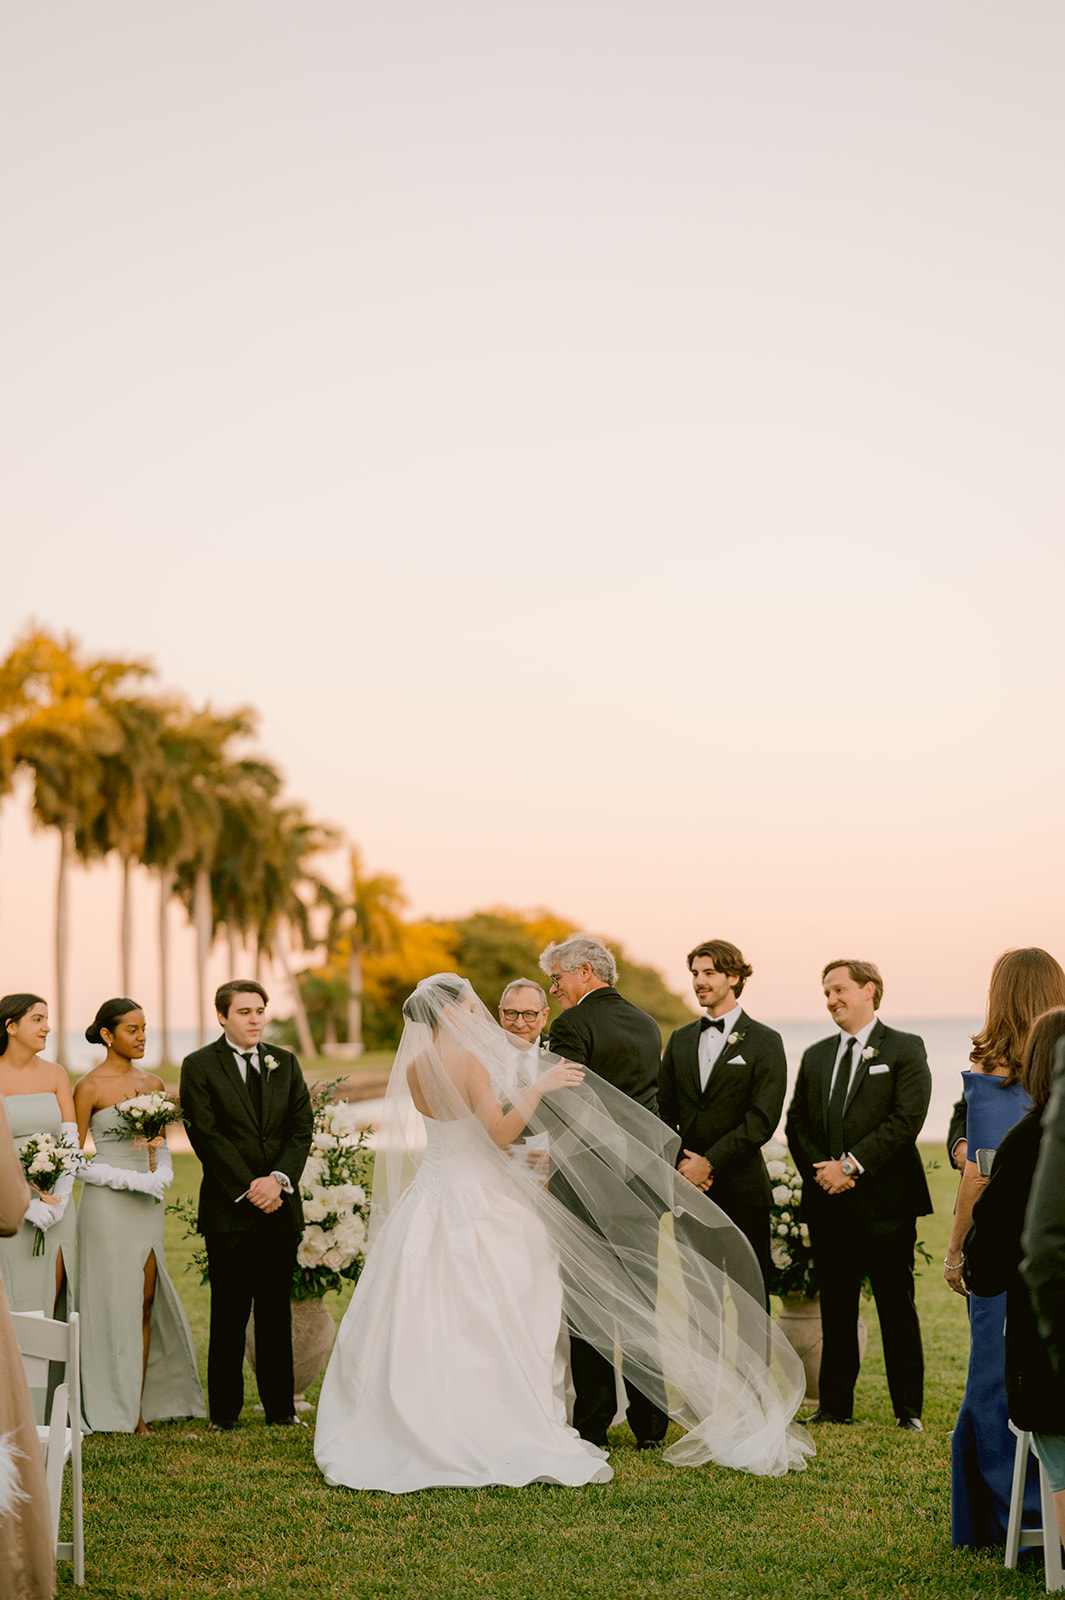 Miami Florida's best wedding photographer captures Bales & Shelby's unforgettable day
